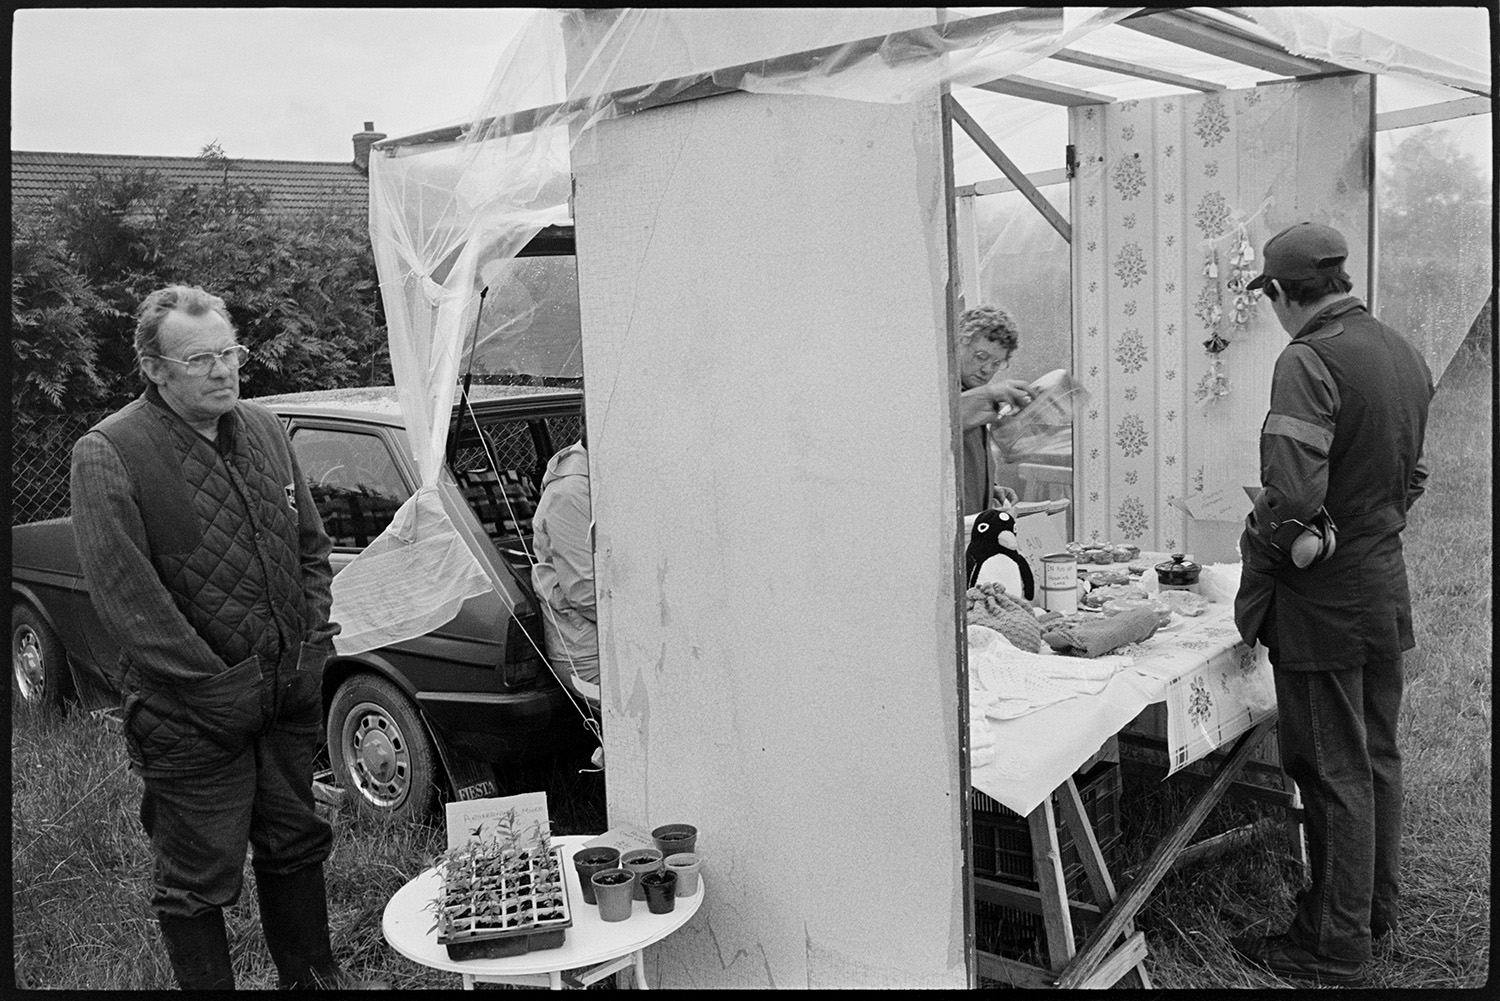 Village Club Day, sports, teas, clay pigeon shoot, committee in discussion.
[A stall at the Village Club Day at Chawleigh. A man is stood behind a small table displaying plants, next to a brick a brac stall. Another man is looking at the goods on the stall. A polythene sheet covers the stall and the car behind it.]